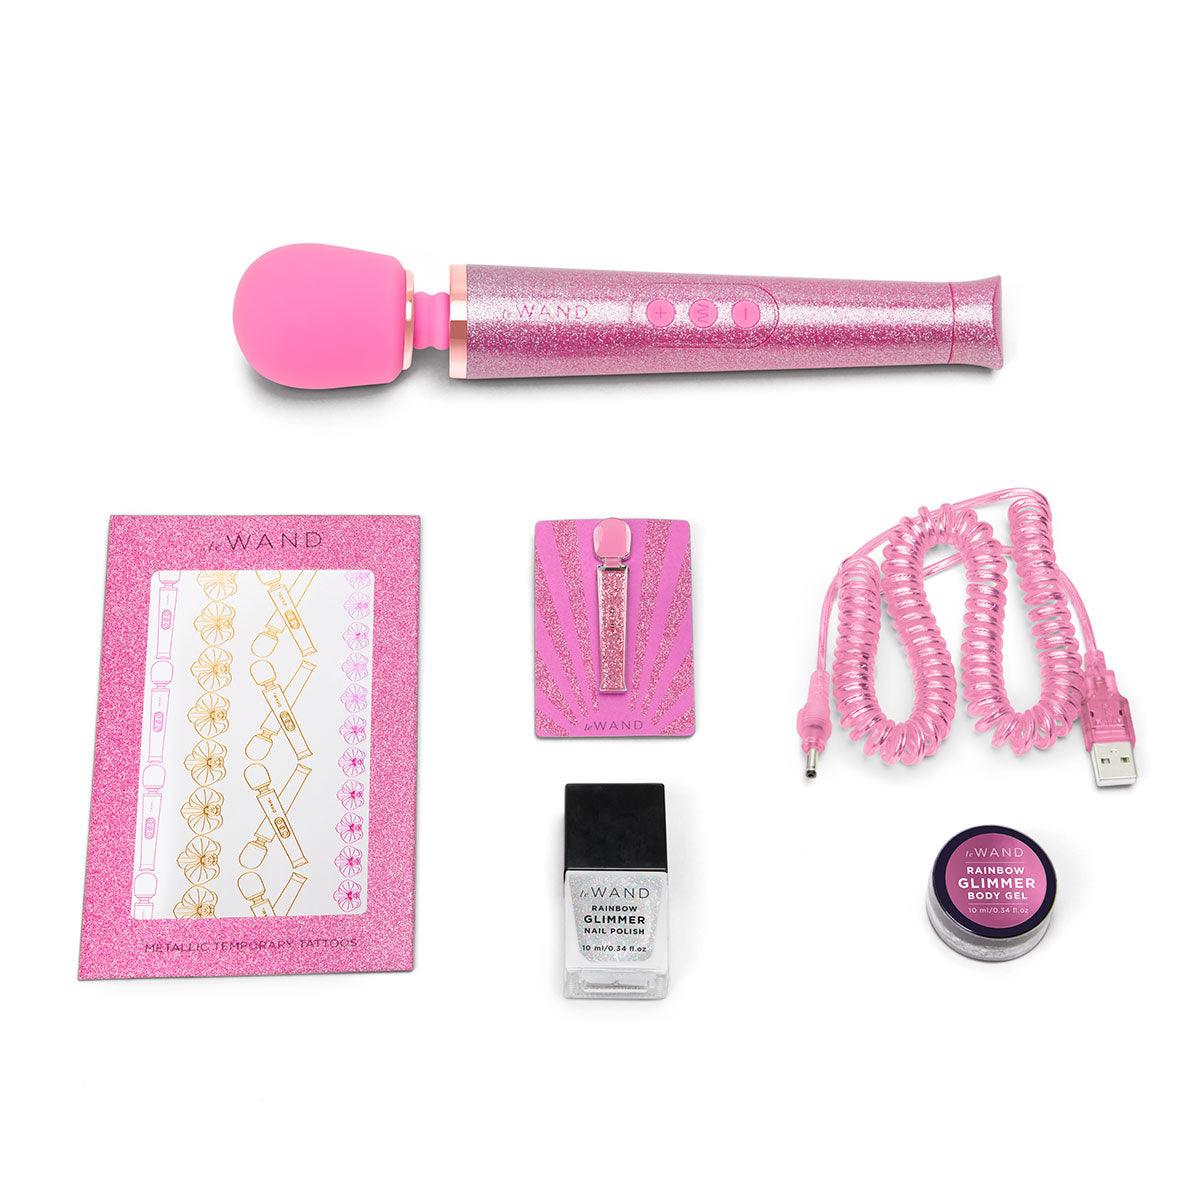 Le Wand - All that Glimmers Pink - shop enby